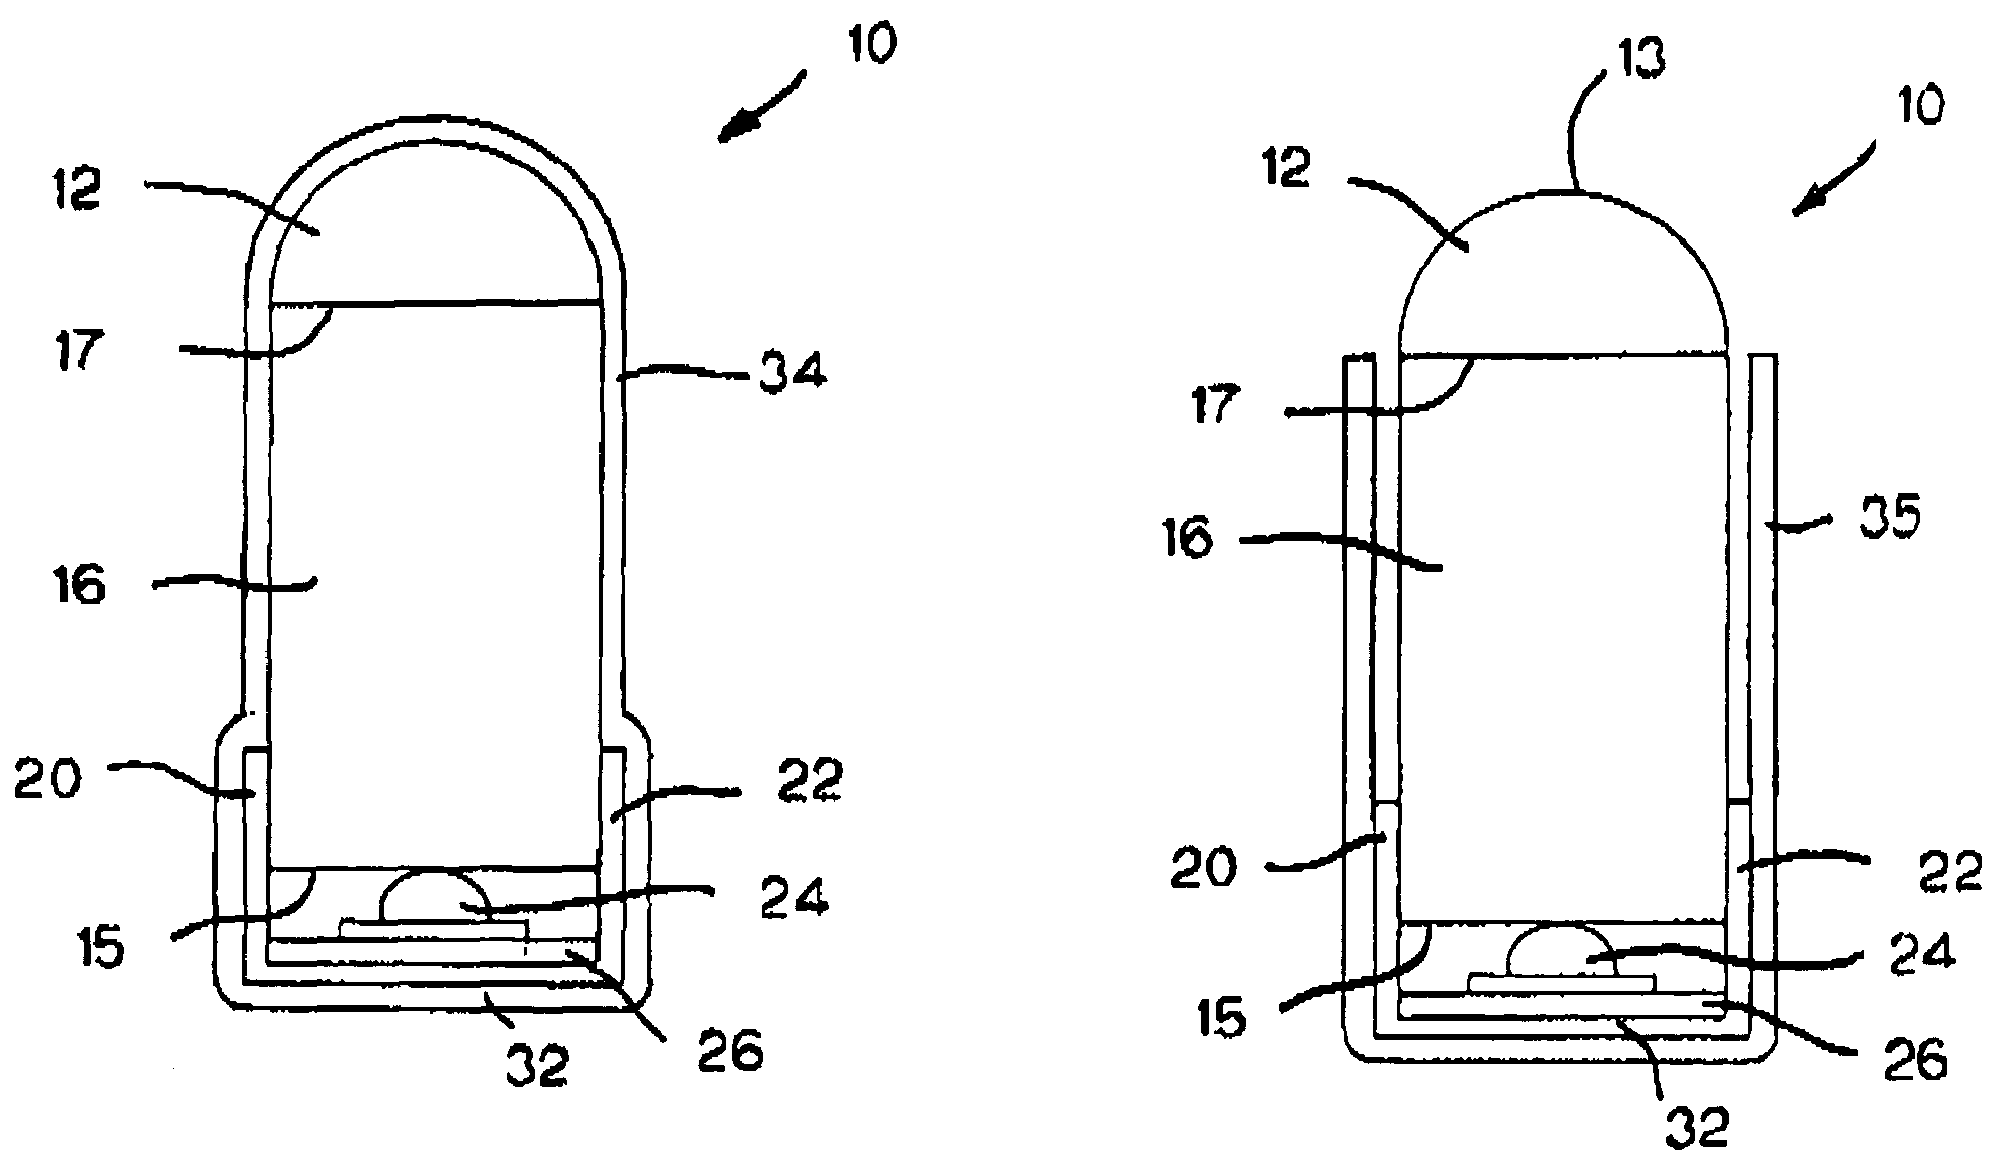 Illumination device for simulating neon or fluorescent lighting including a waveguide and a scattering cap